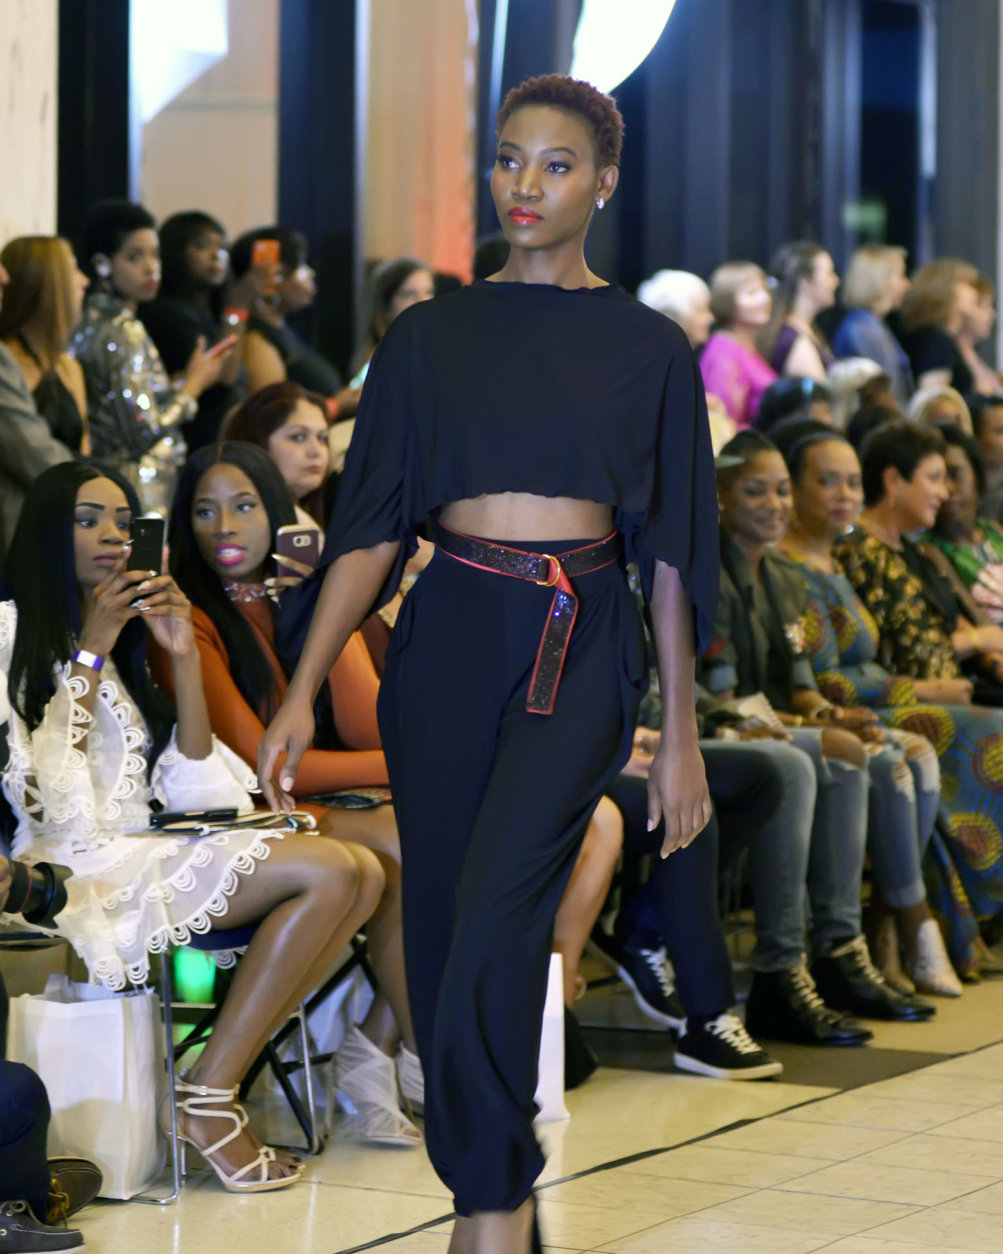 A model wearing an outfit by designer Sierra Mitchell walks the runway at DC Fashion Week's 2018 International Couture Collections at the Embassy of France